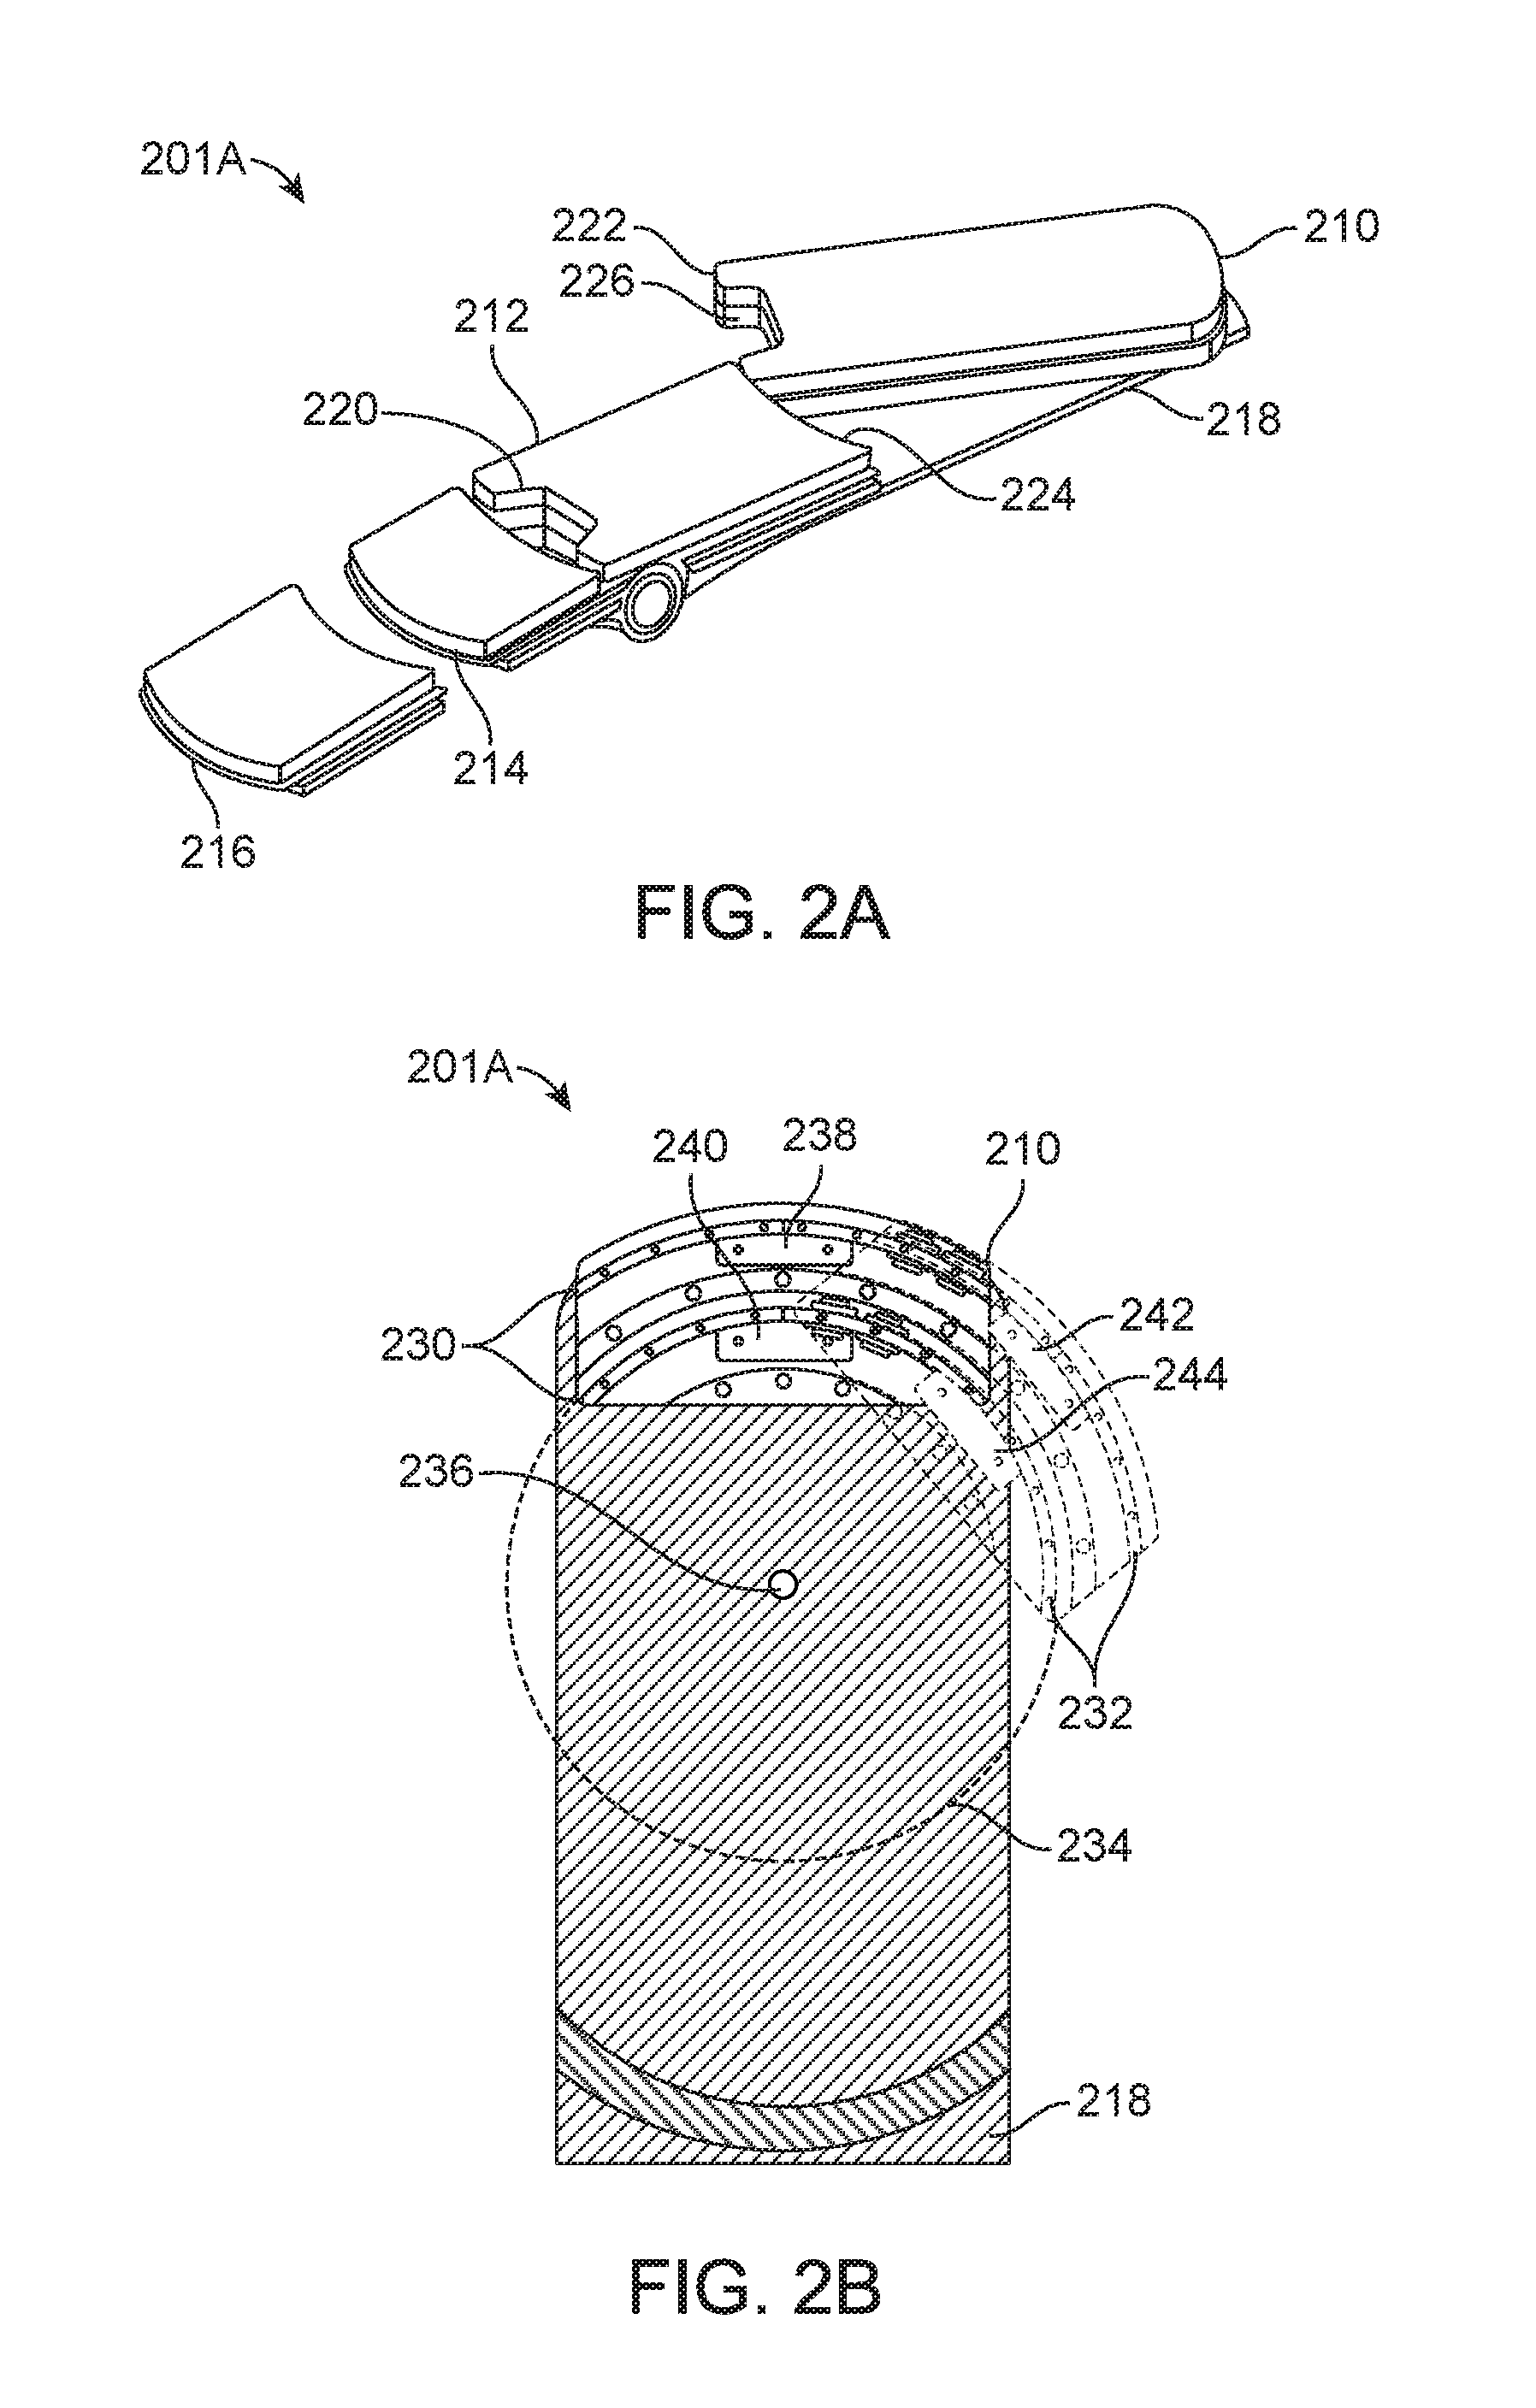 Swivel bed for a surgical robotics system